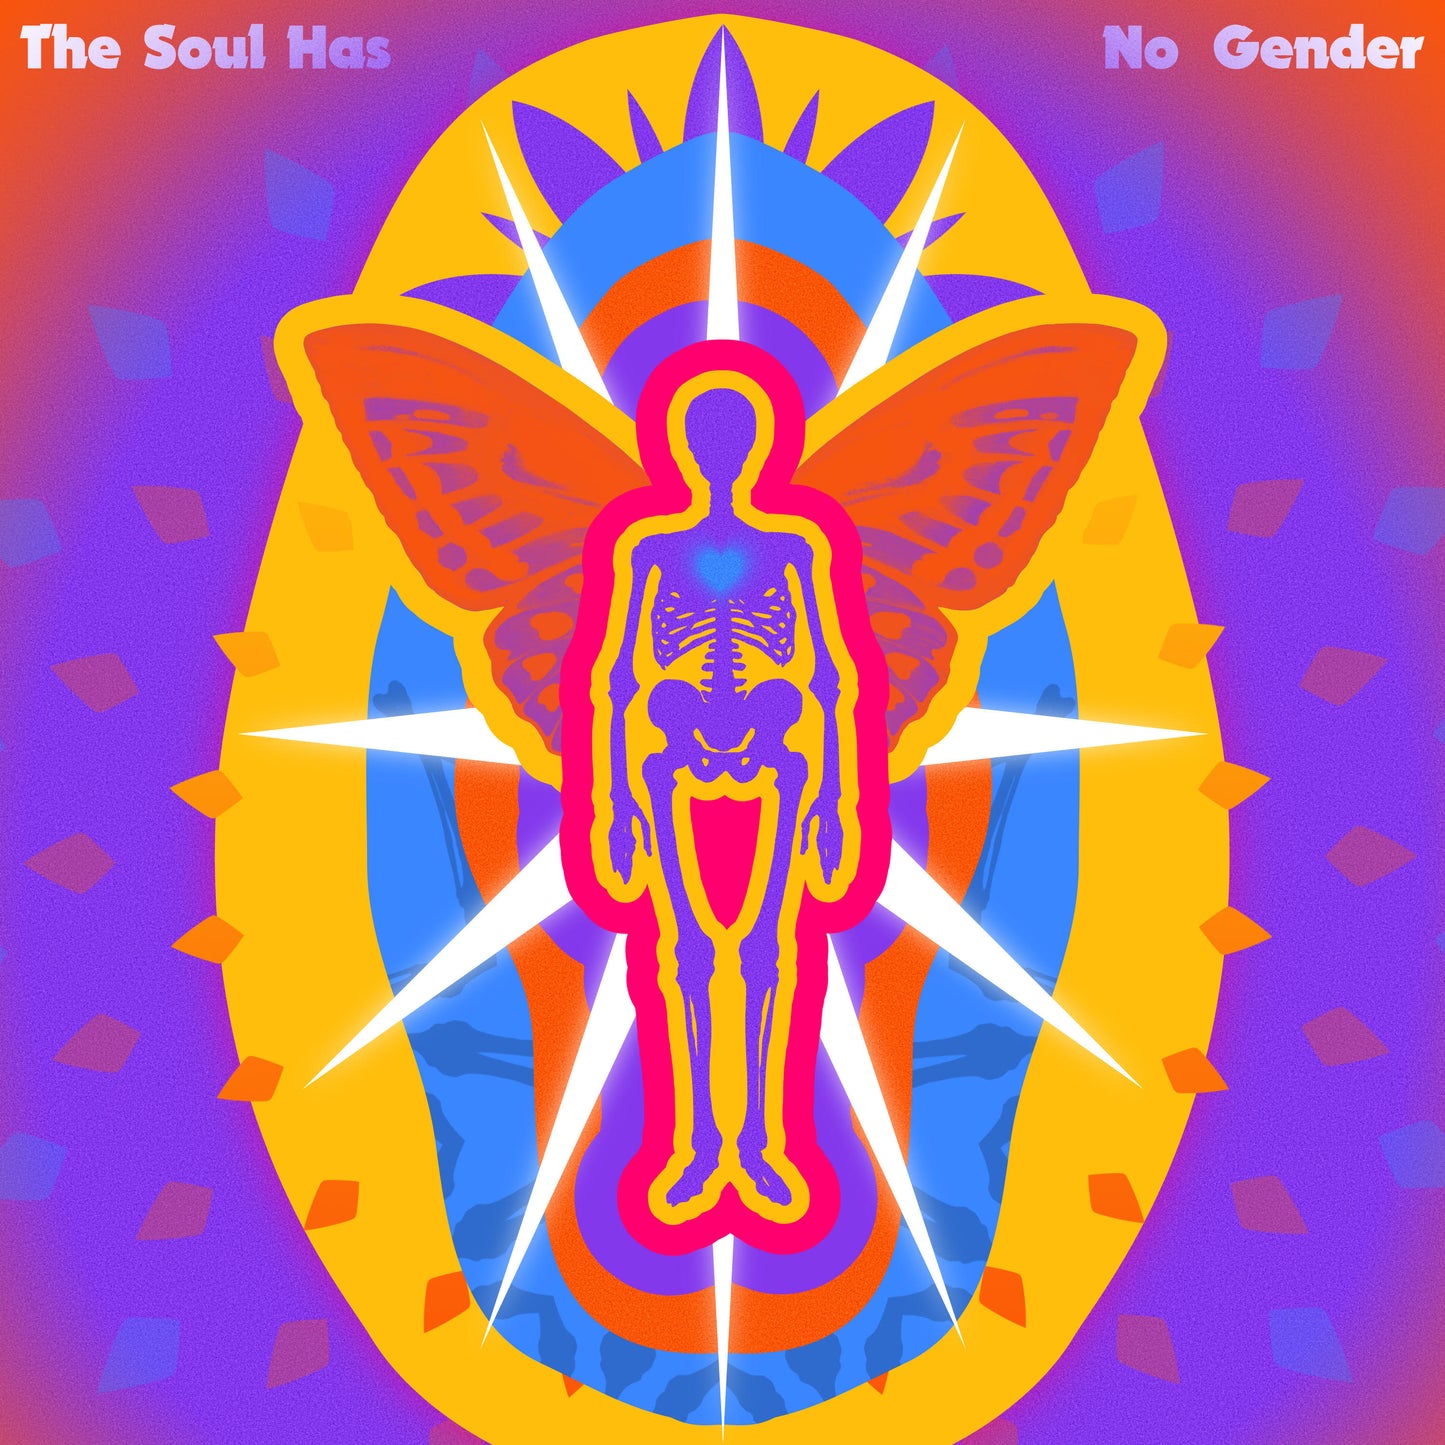 The Soul Has No Gender by Martin Szalai